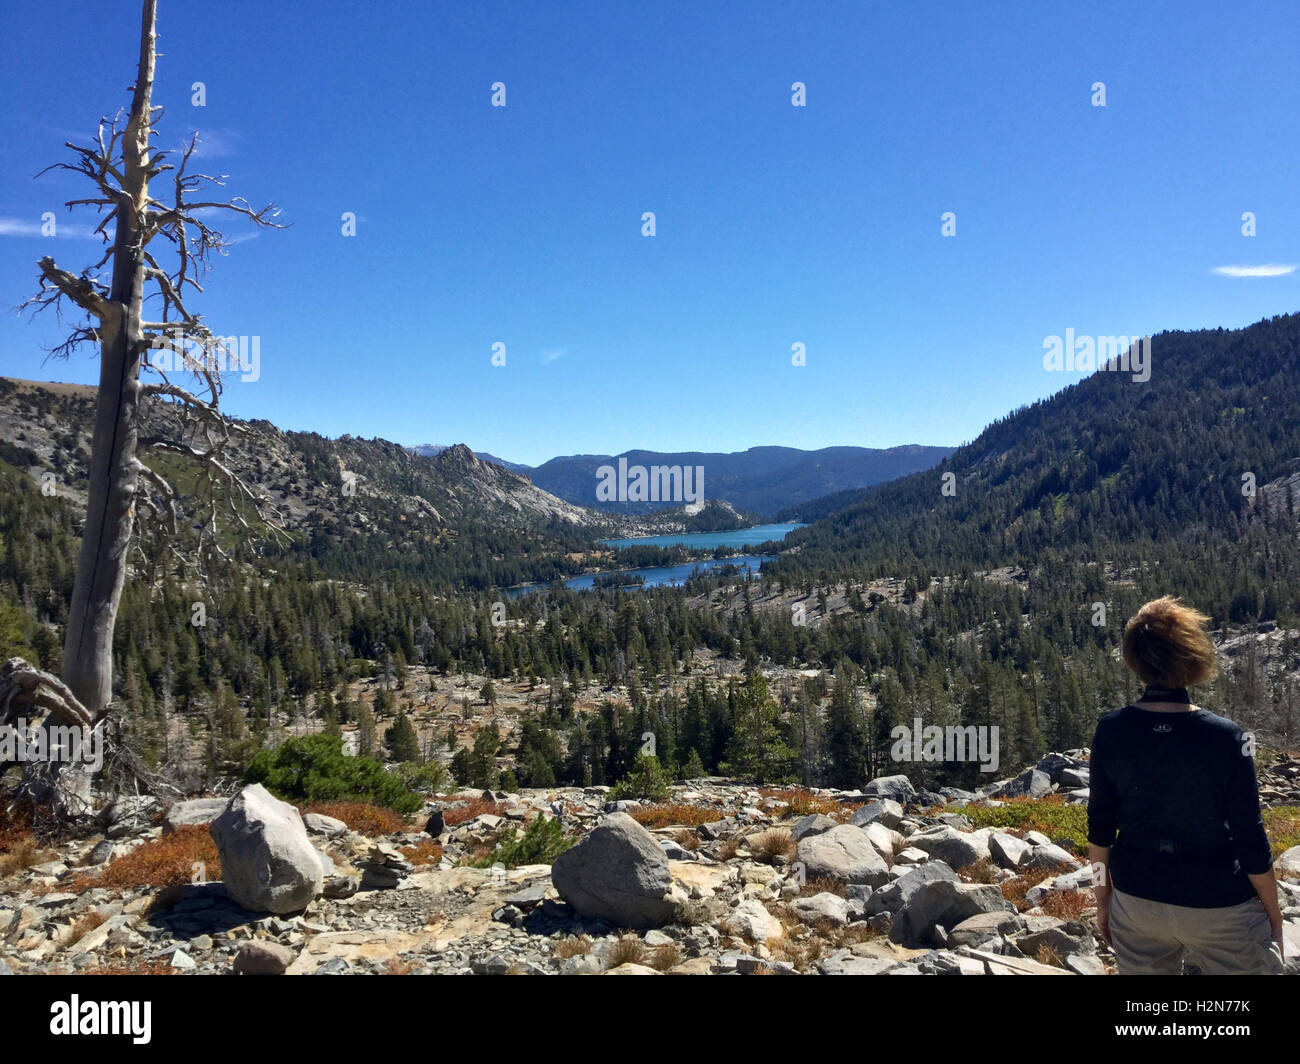 A hiker enjoys the view above Echo Lake in Desolation Wilderness near Lake Tahoe, California Stock Photo